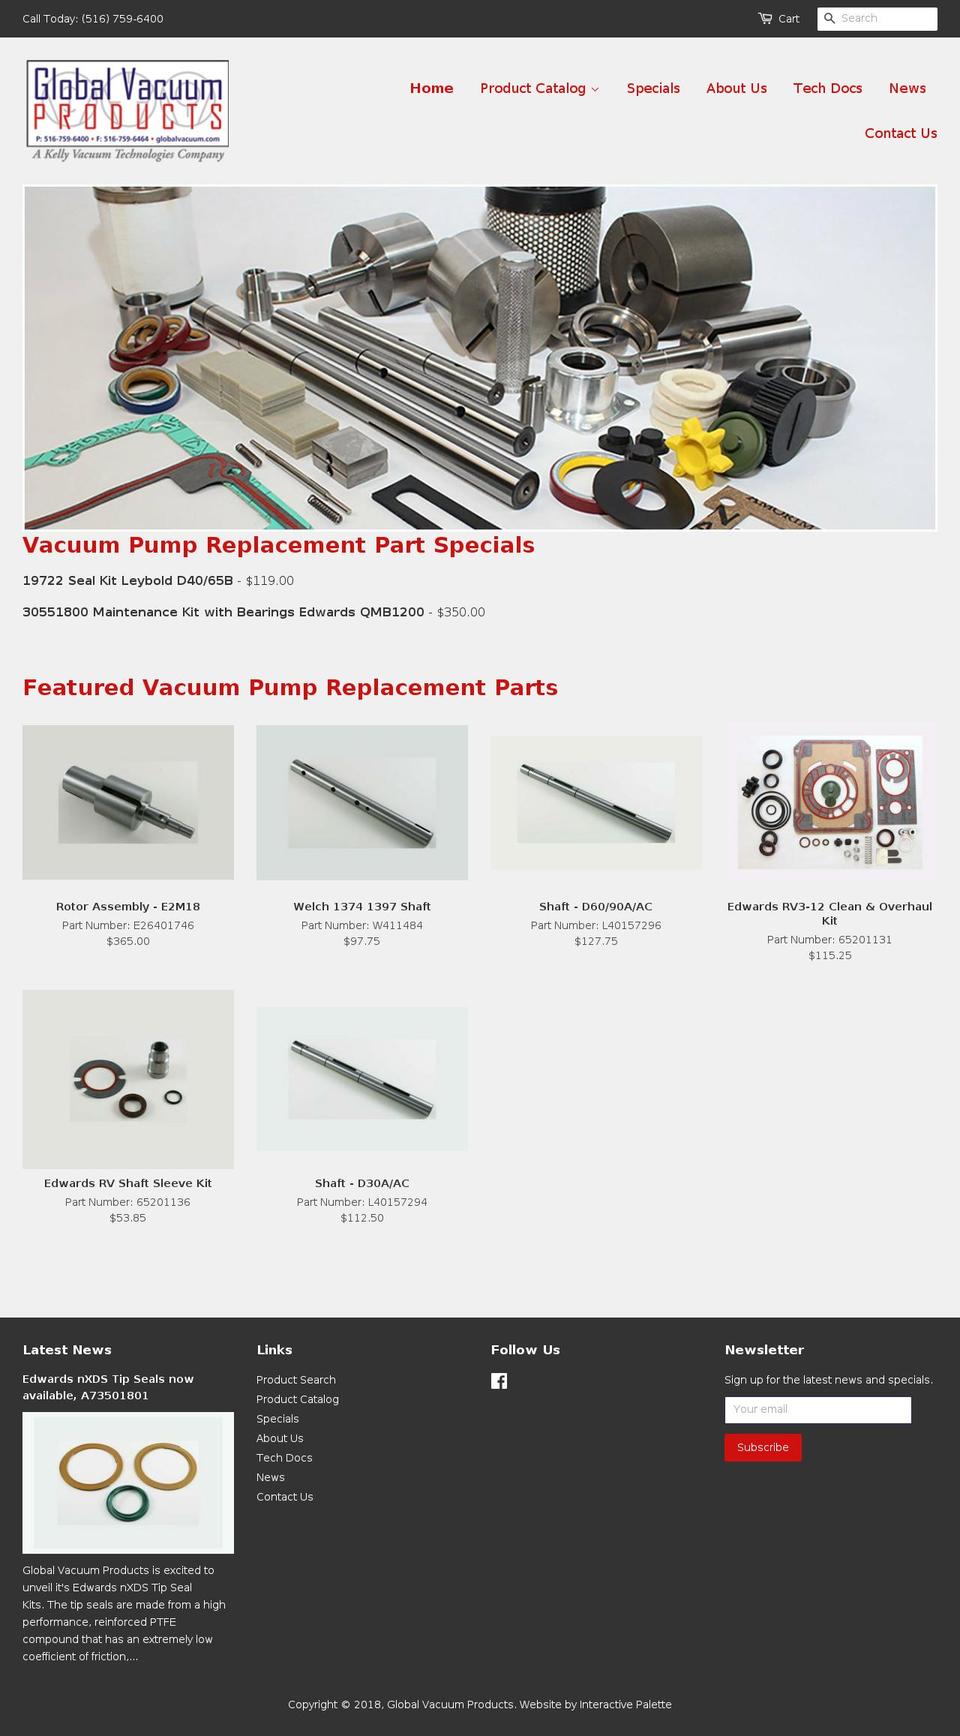 Global Vacuum Products Shopify theme site example globalvacuum.com